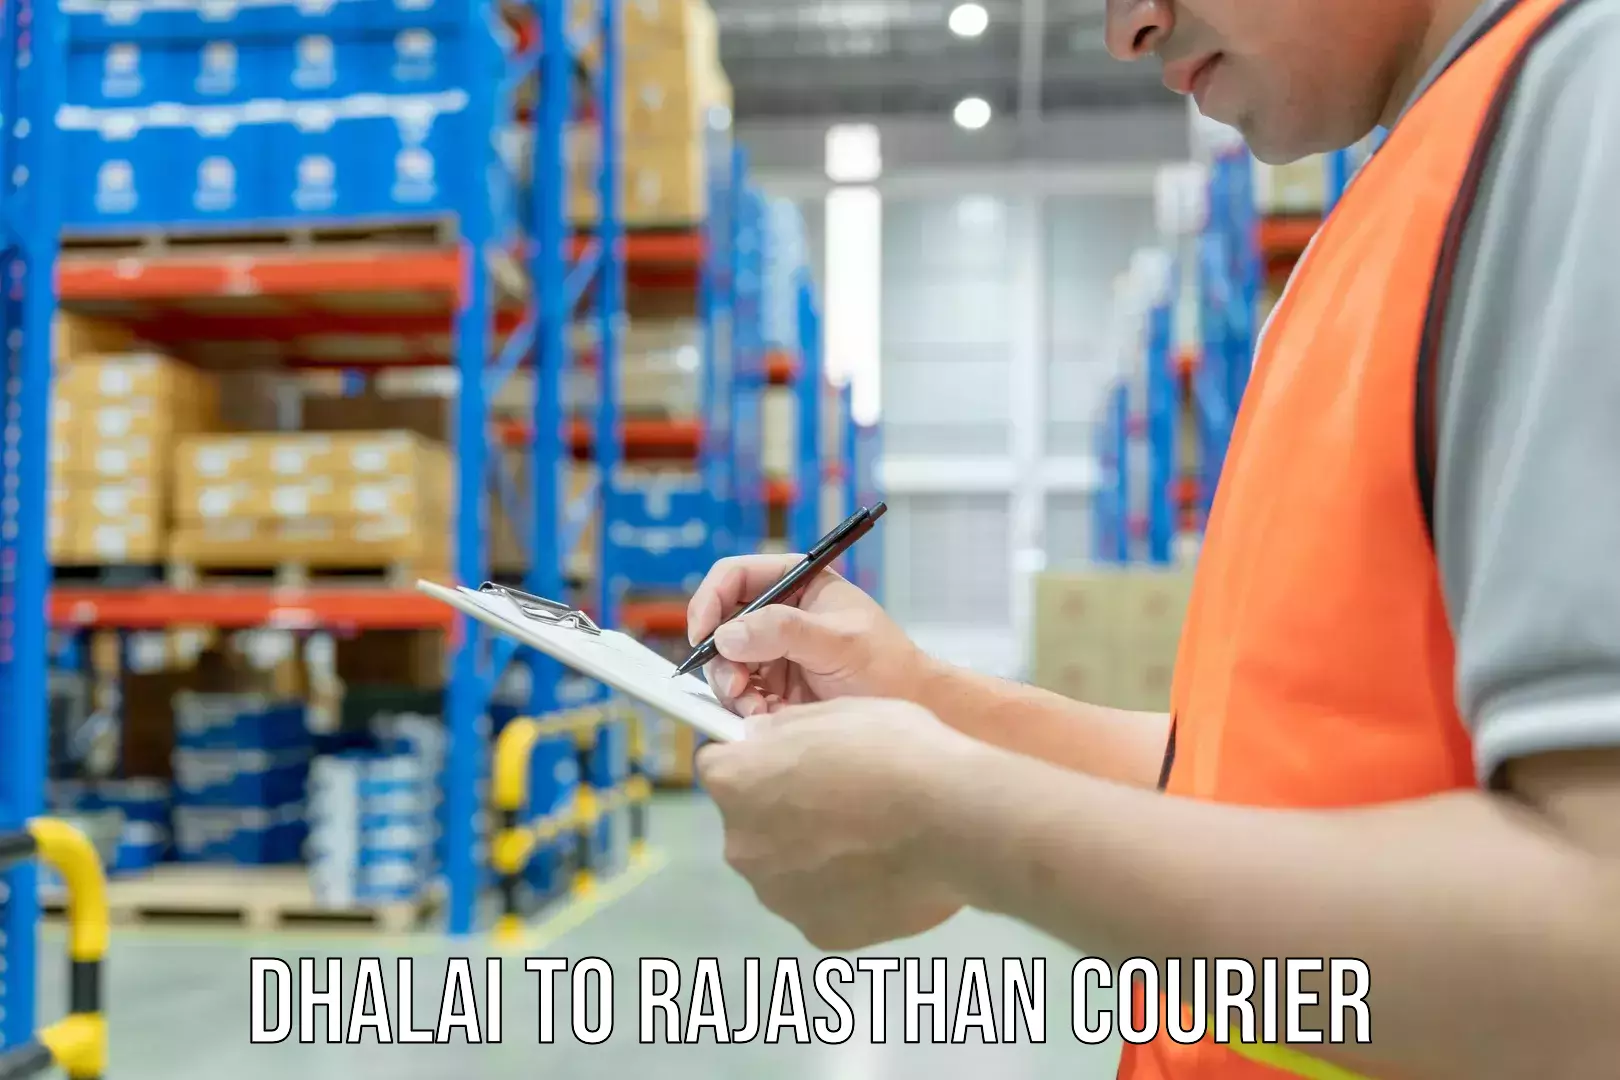 Cash on delivery service Dhalai to Rajasthan